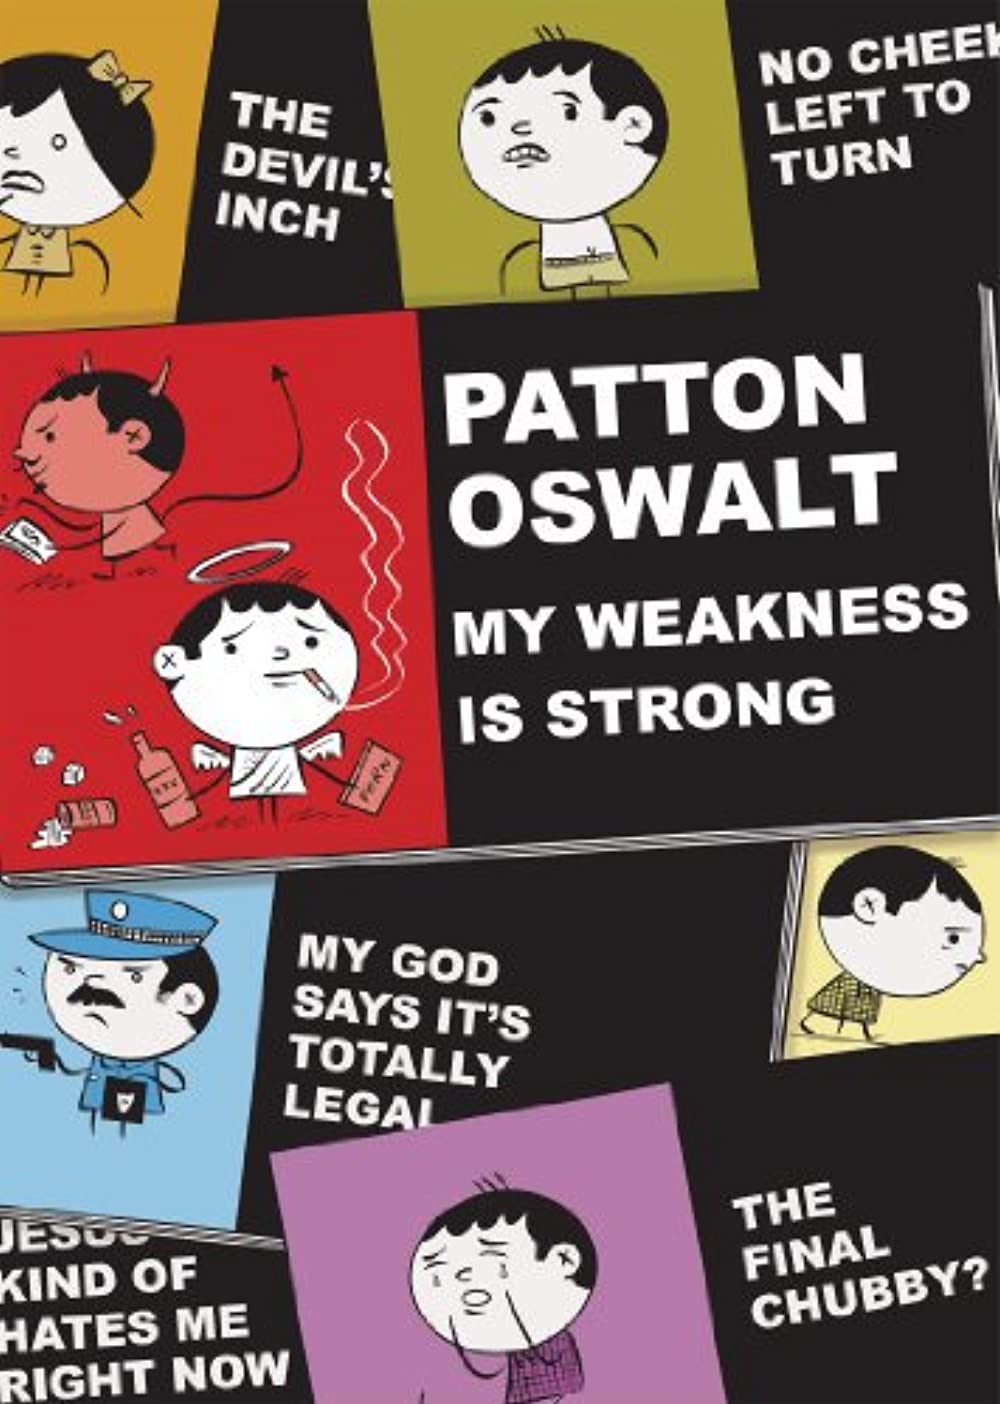 Download Patton Oswalt: My Weakness Is Strong Movie | Patton Oswalt: My Weakness Is Strong Hd, Dvd